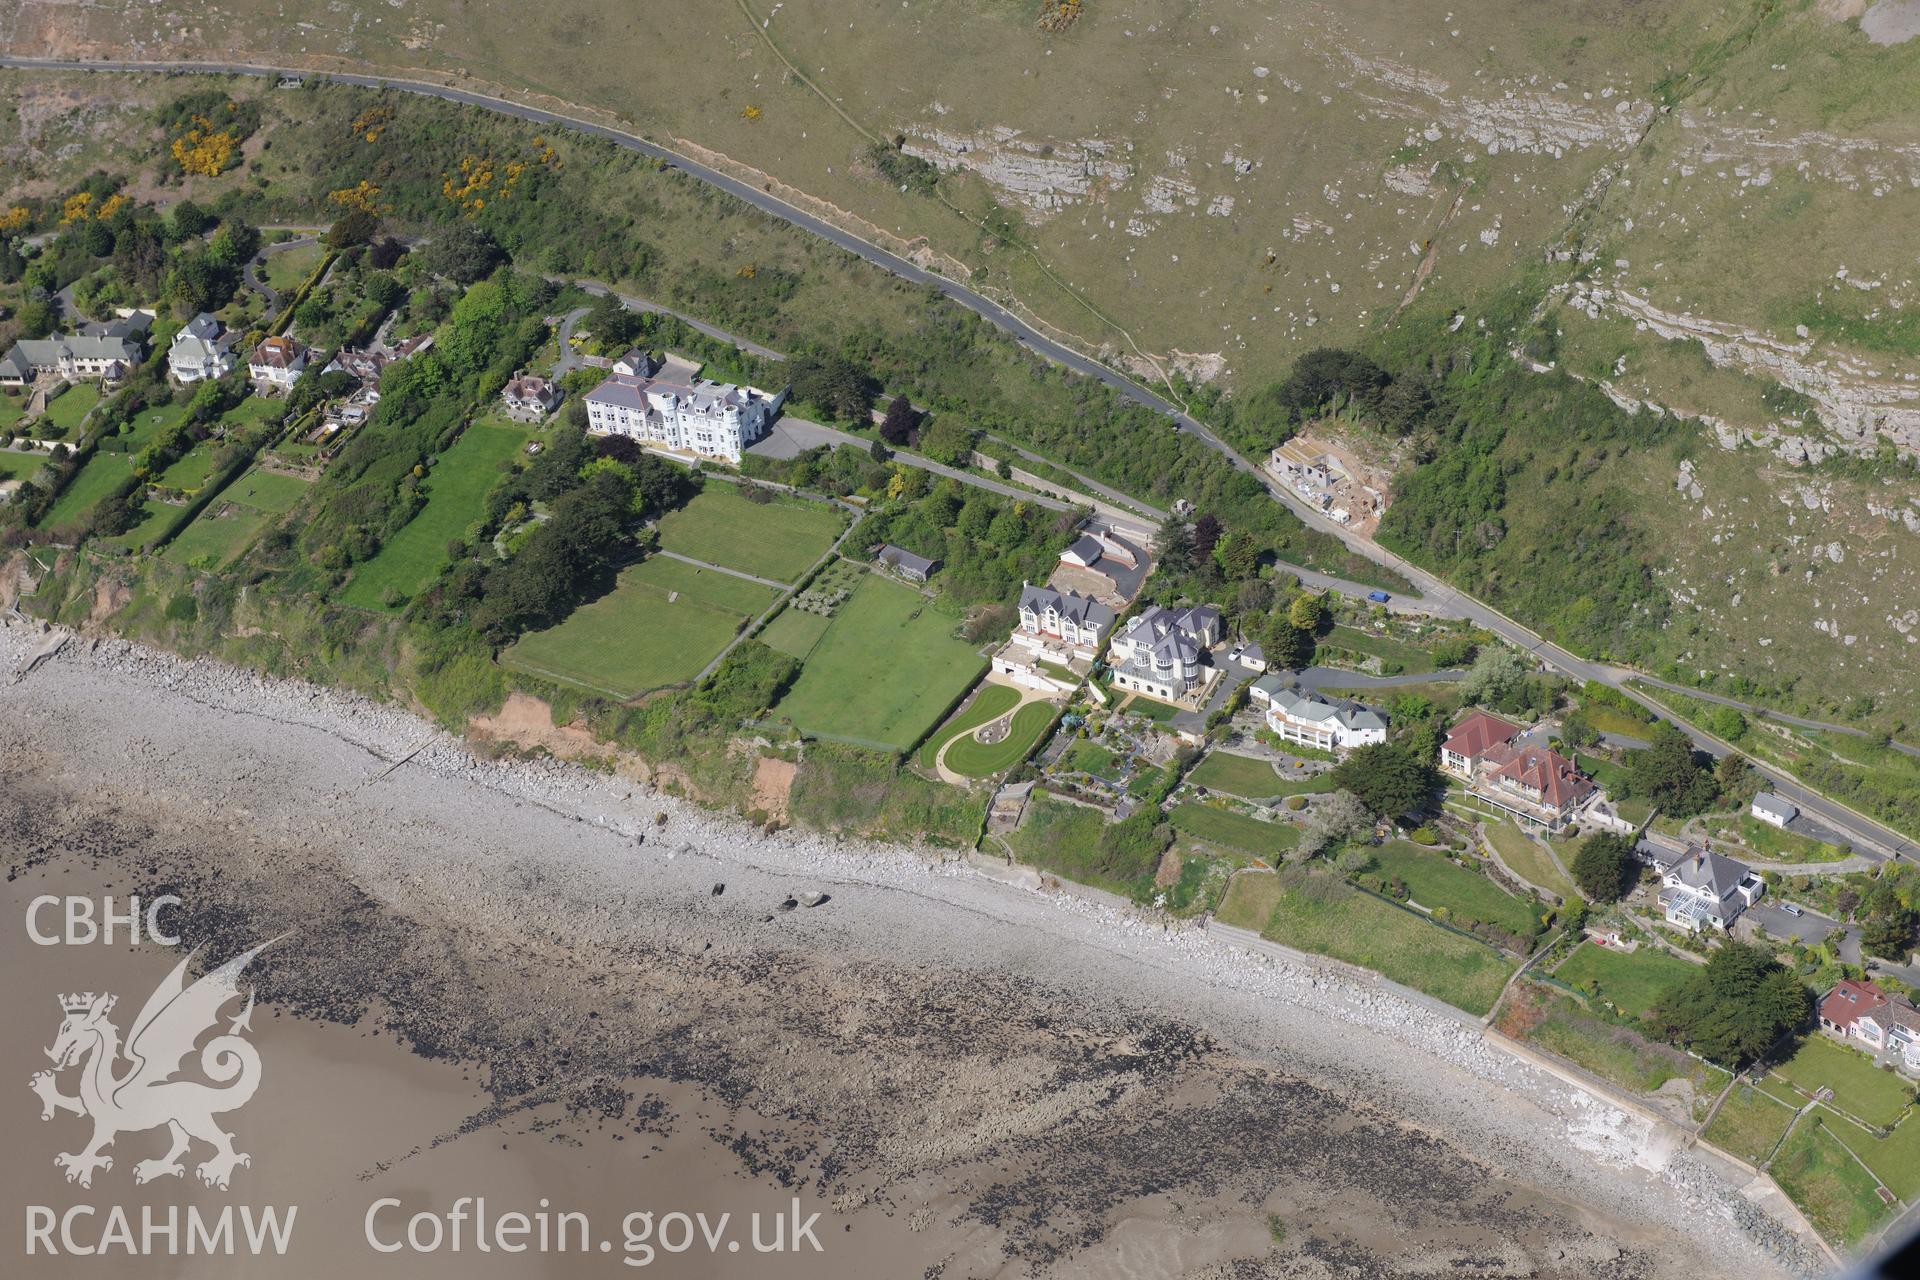 The remains of Gogarth Abbey, Gogarth Abbey convalescent home and Gogarth Abbey garden, Llandudno. Oblique aerial photograph taken during the Royal Commission?s programme of archaeological aerial reconnaissance by Toby Driver on 22nd May 2013.